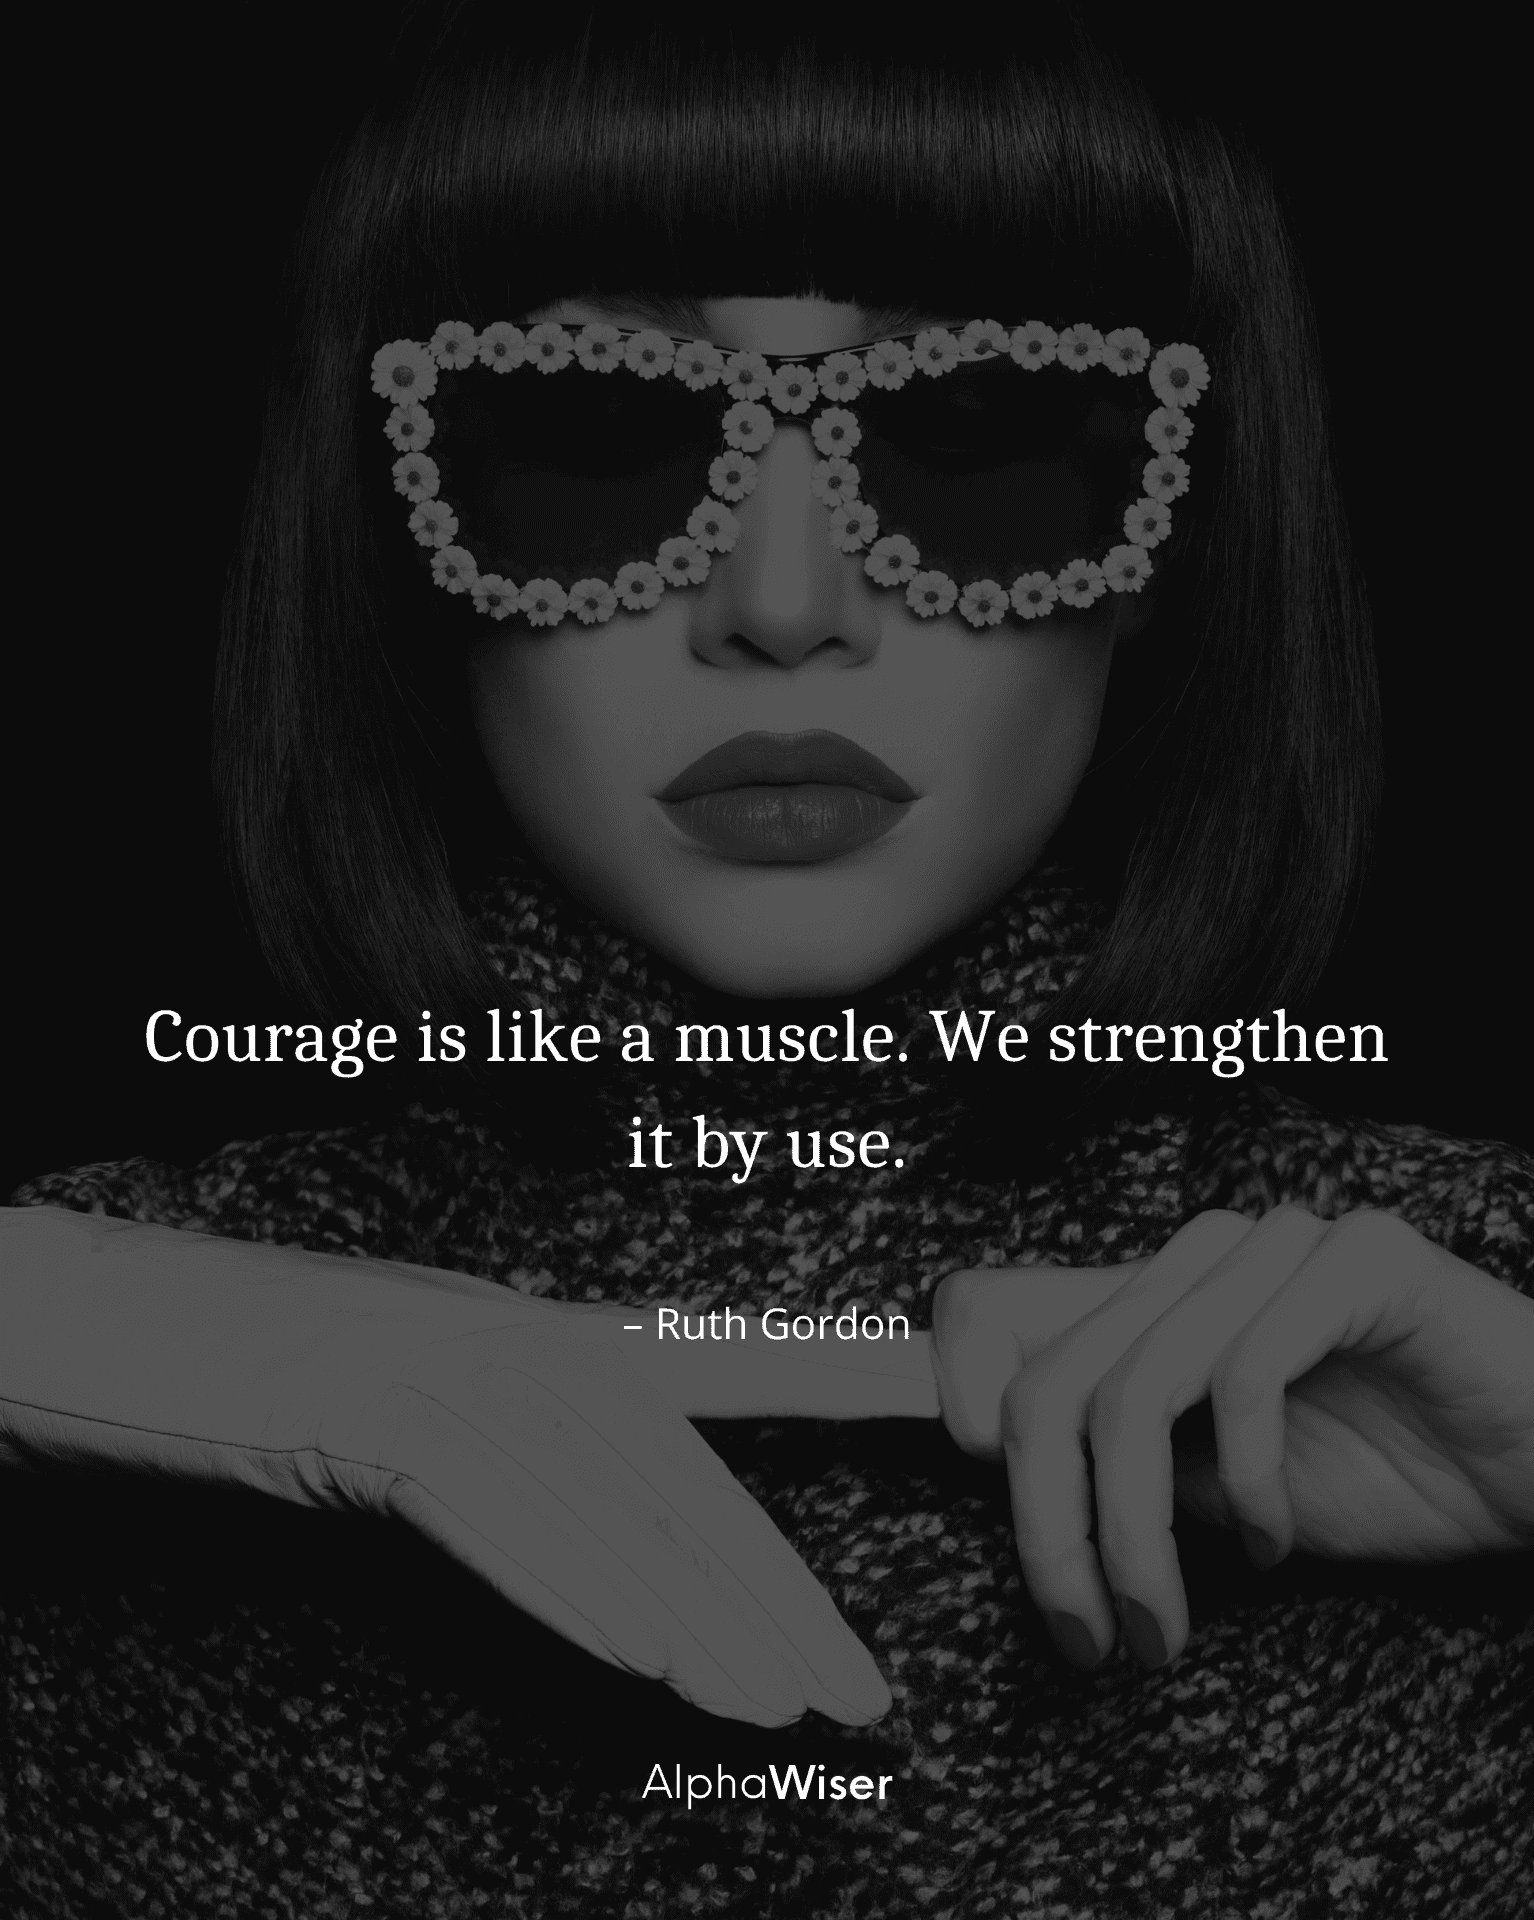 Courage is like a muscle. We strengthen it by use.